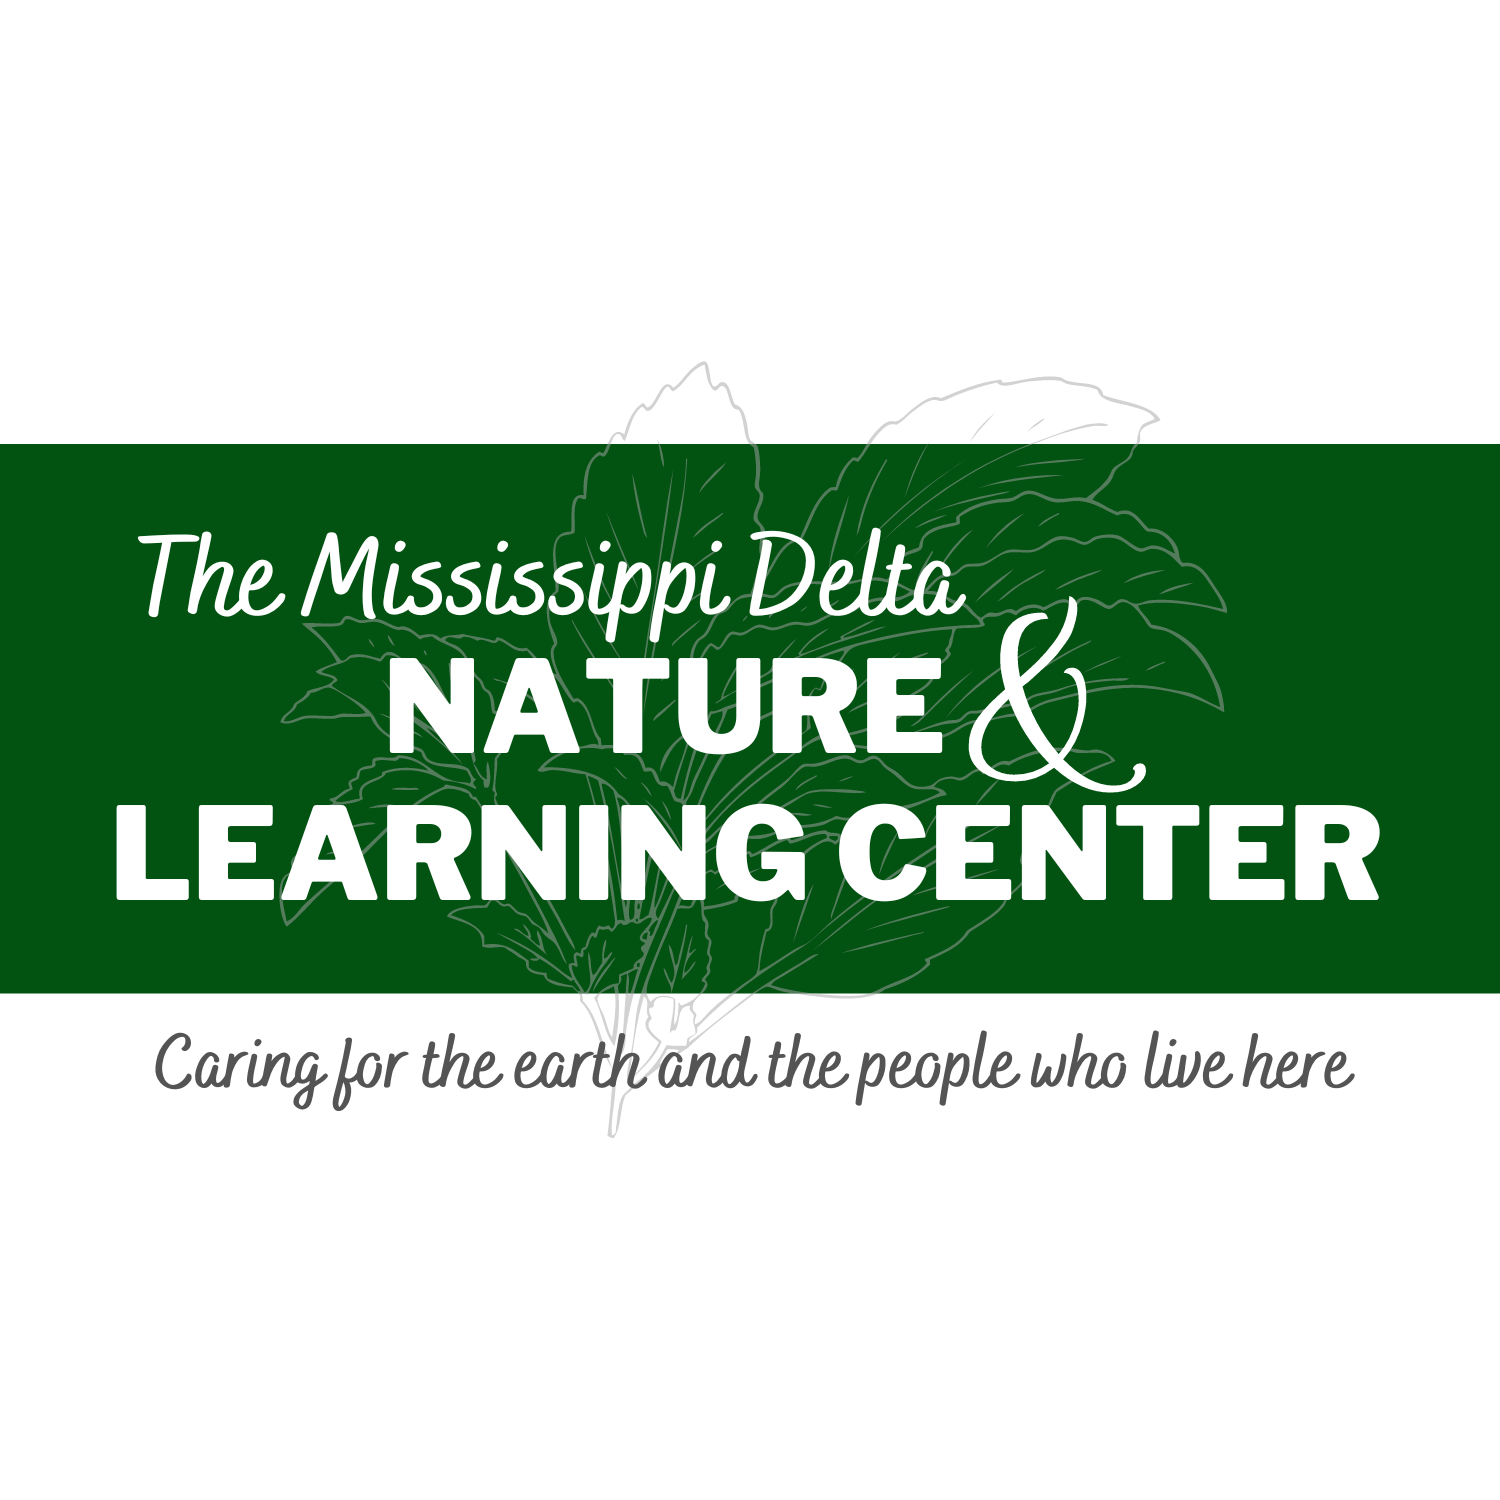 The Mississippi Delta Nature & Learning Center